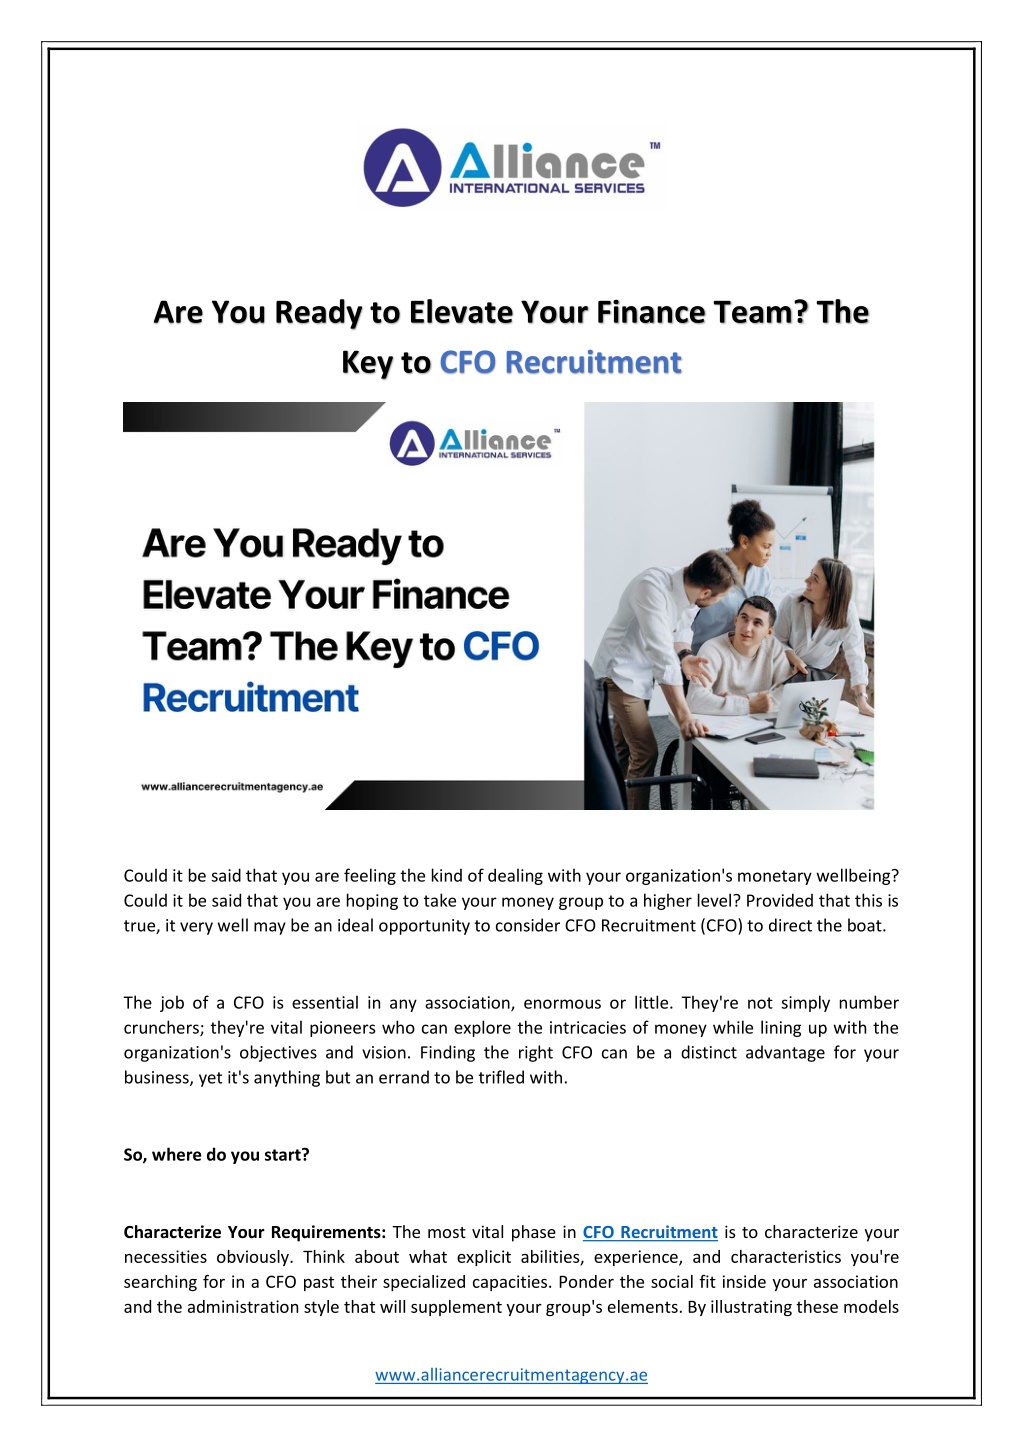 are you ready to elevate your finance team l.w